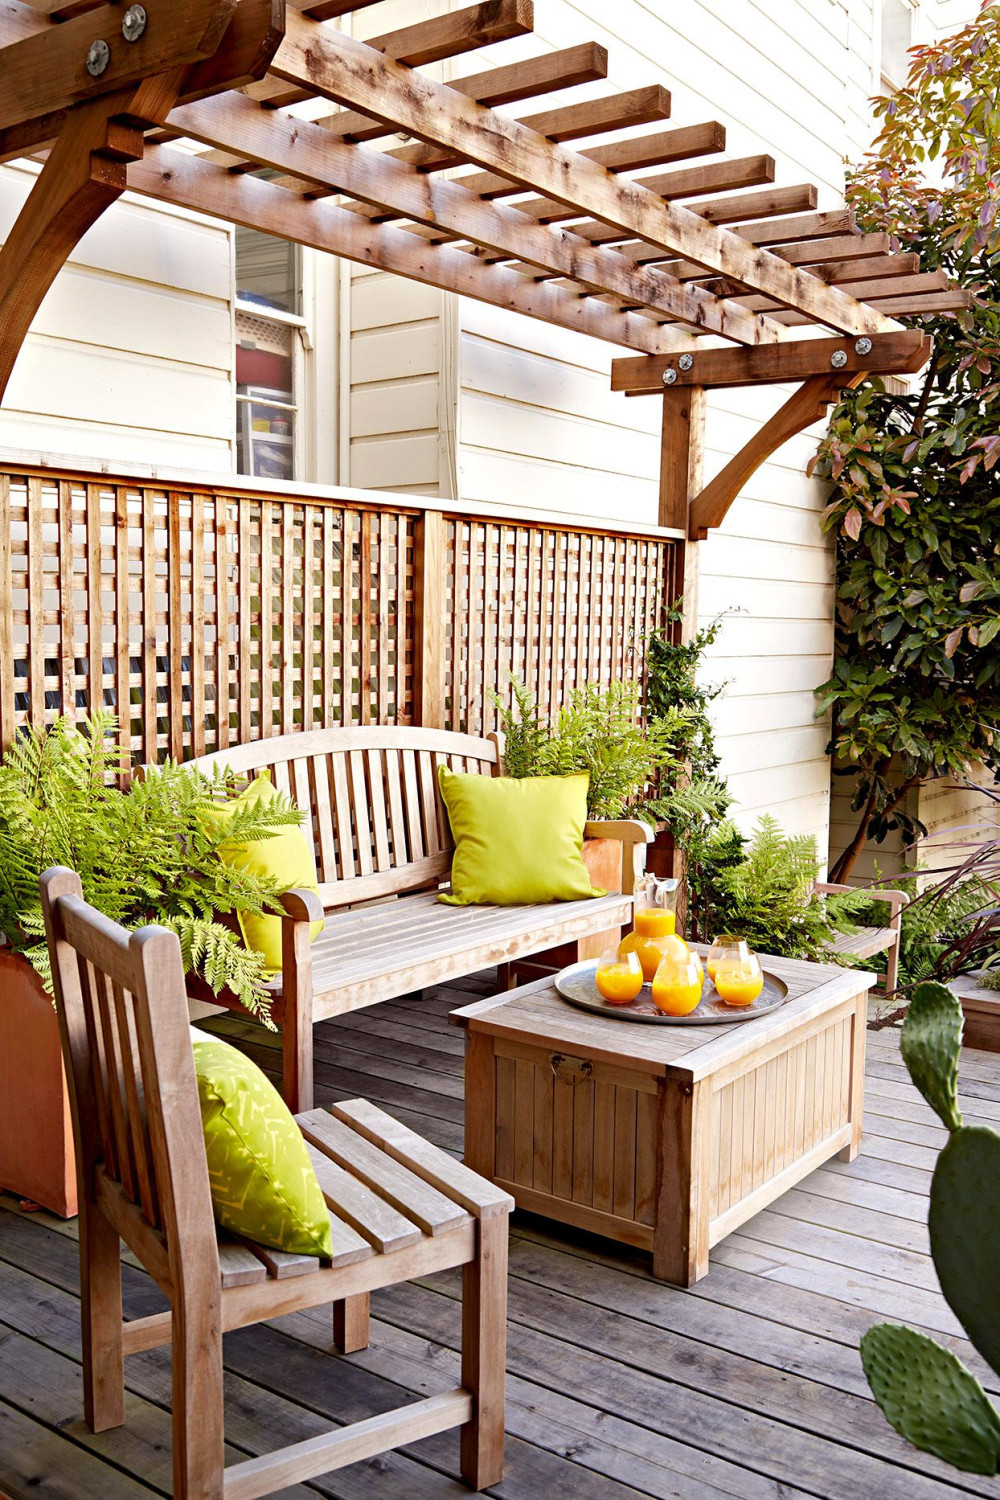 Small-Deck Ideas to Maximize Your Outdoor Living Space